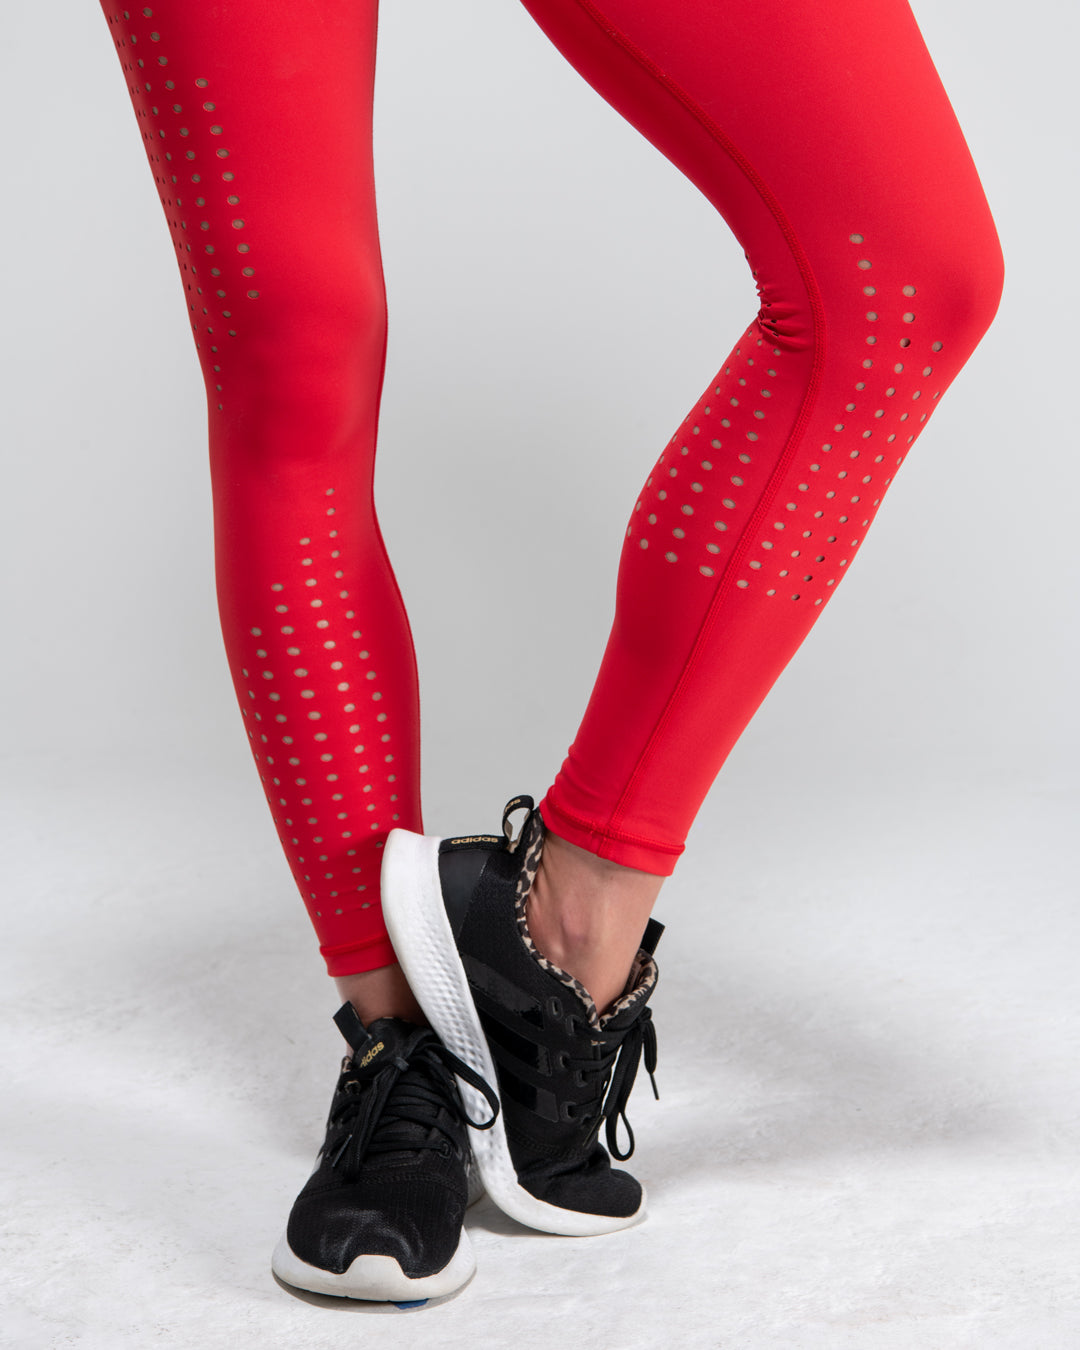 kadyluxe-womens-activewear-legging-red-laser-punch-out-holes